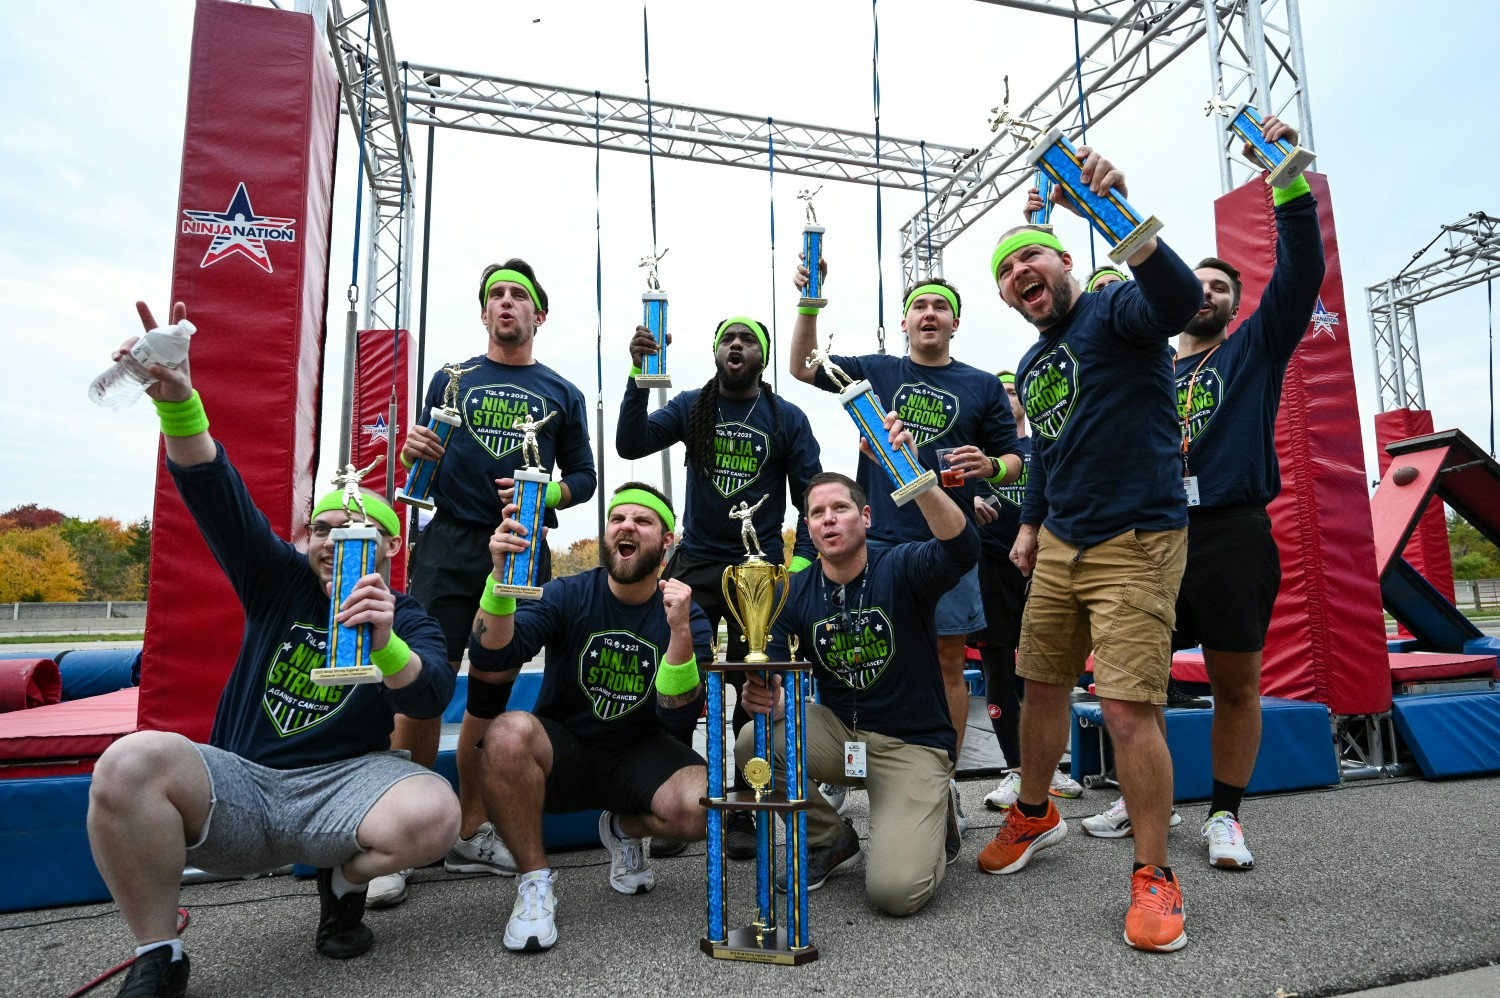 Winners at the Ninja Strong Against Cancer employee event, which helped raise $123,986 for the American Cancer Society.